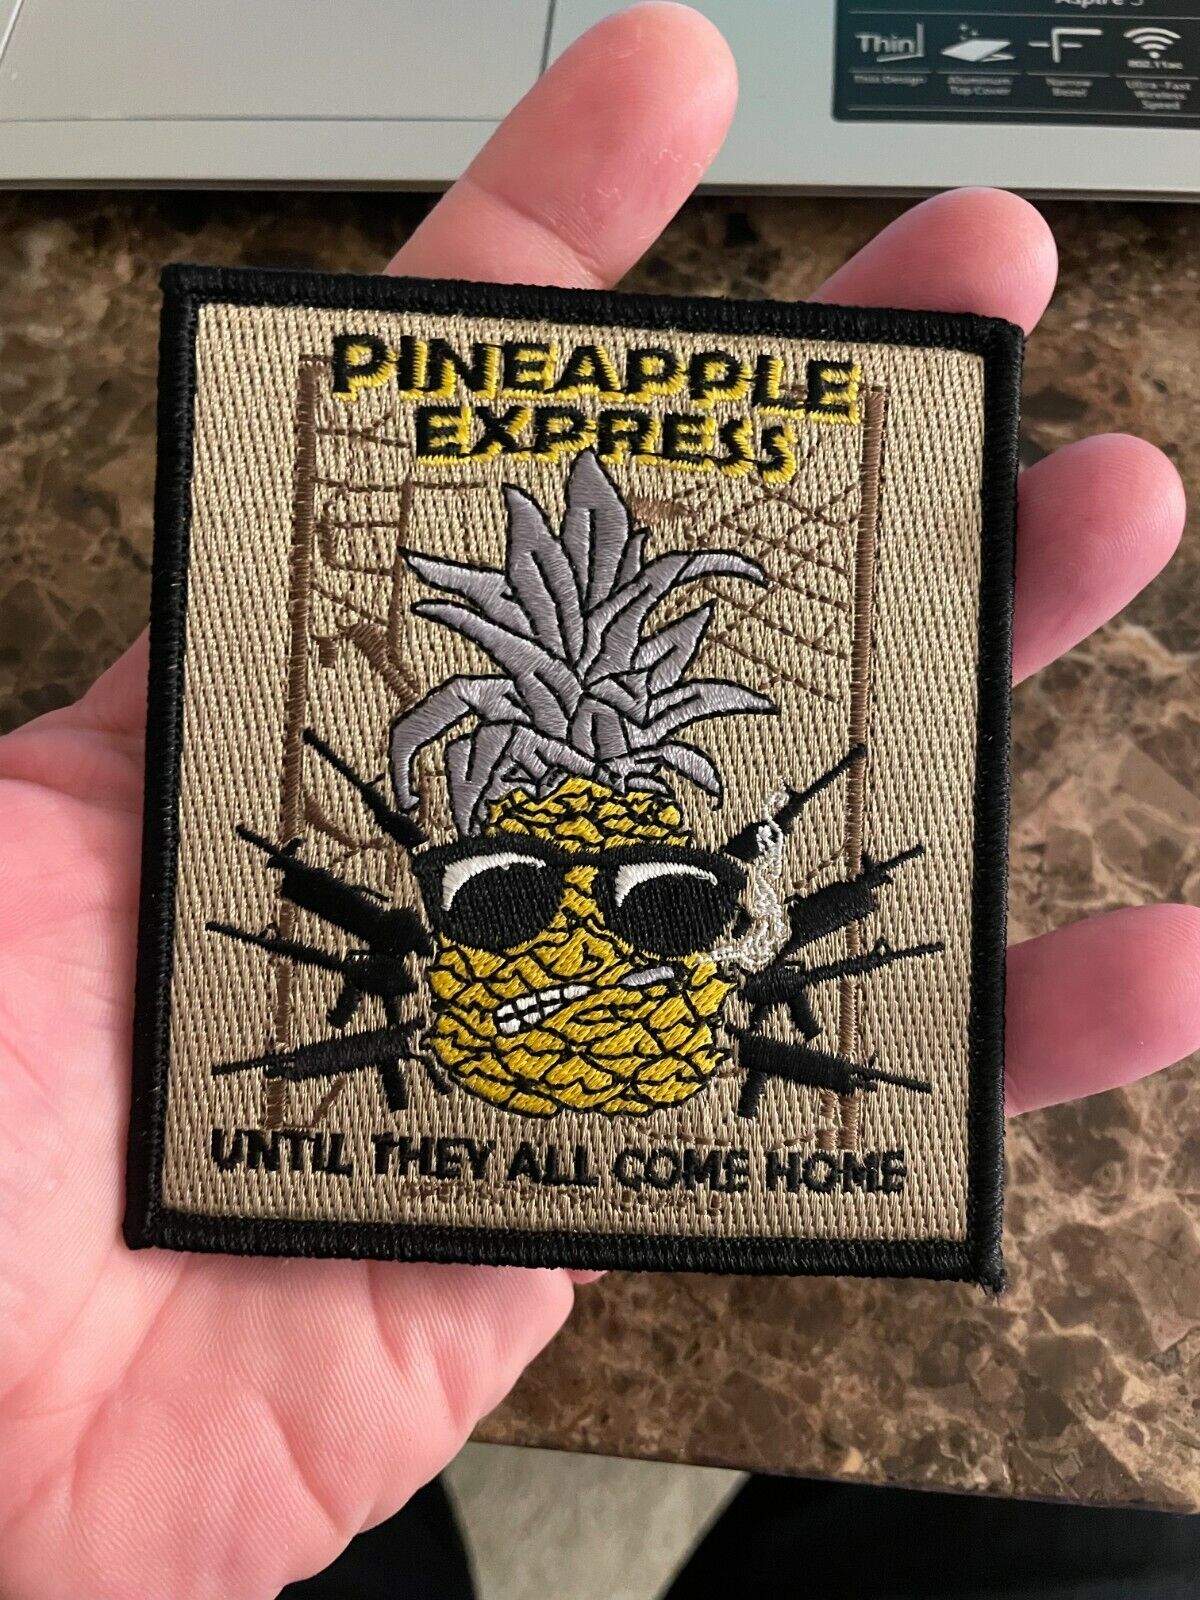 PineApple Express Until They All Come Home VELCRO® BRAND Fastener Morale PATCH